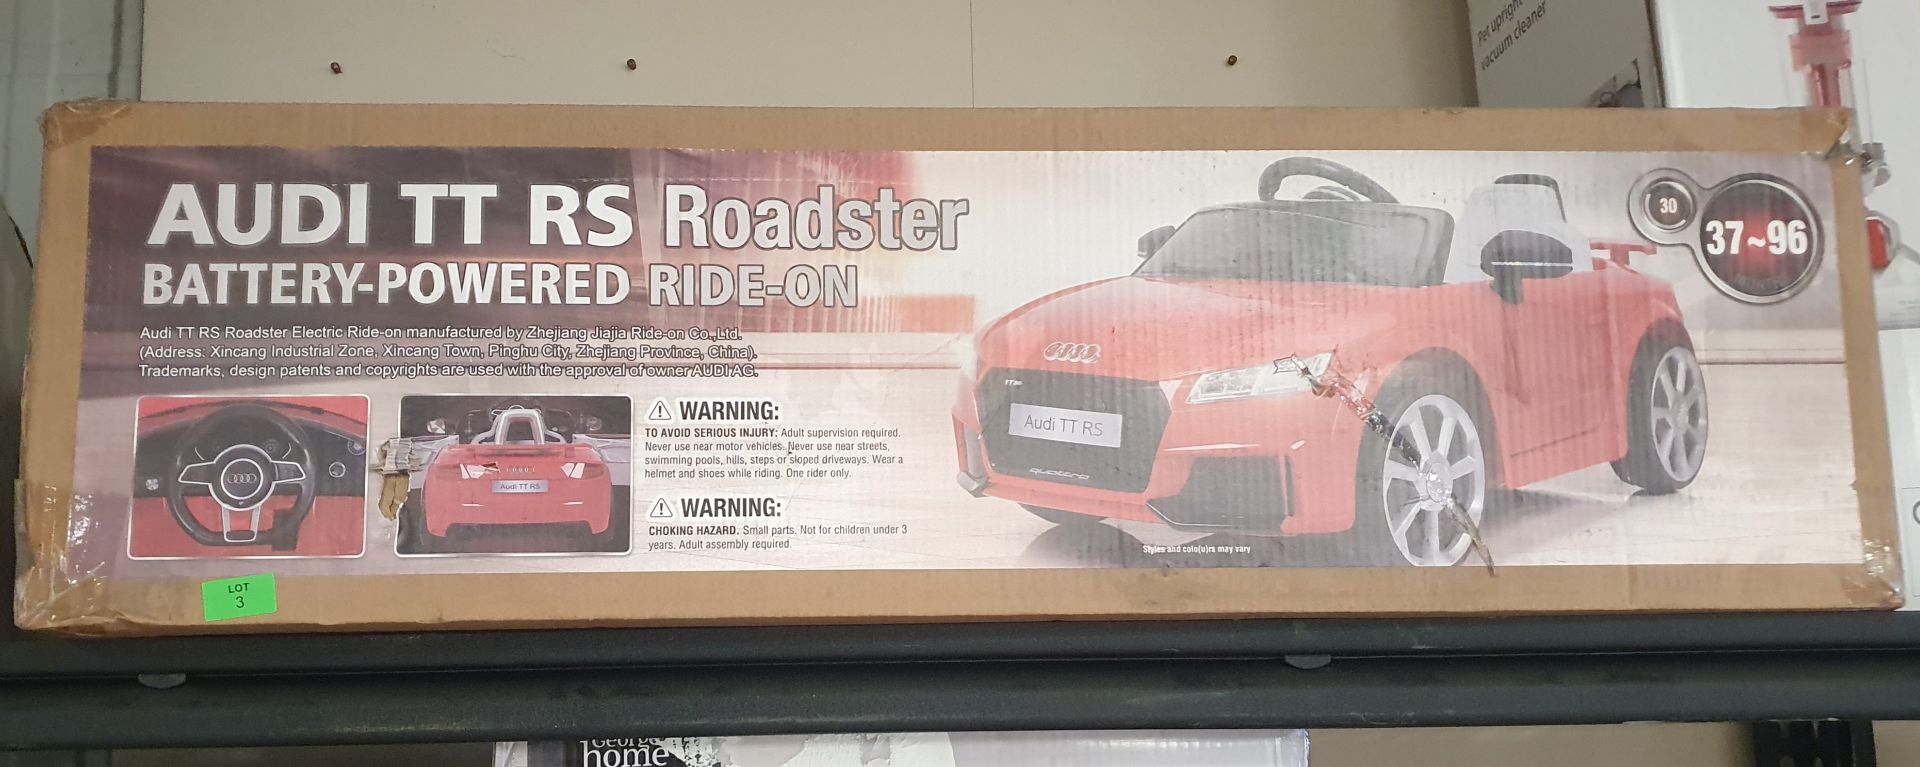 Audi TT RS Ride On Battery Power Childrens Roadster Car - Image 2 of 2